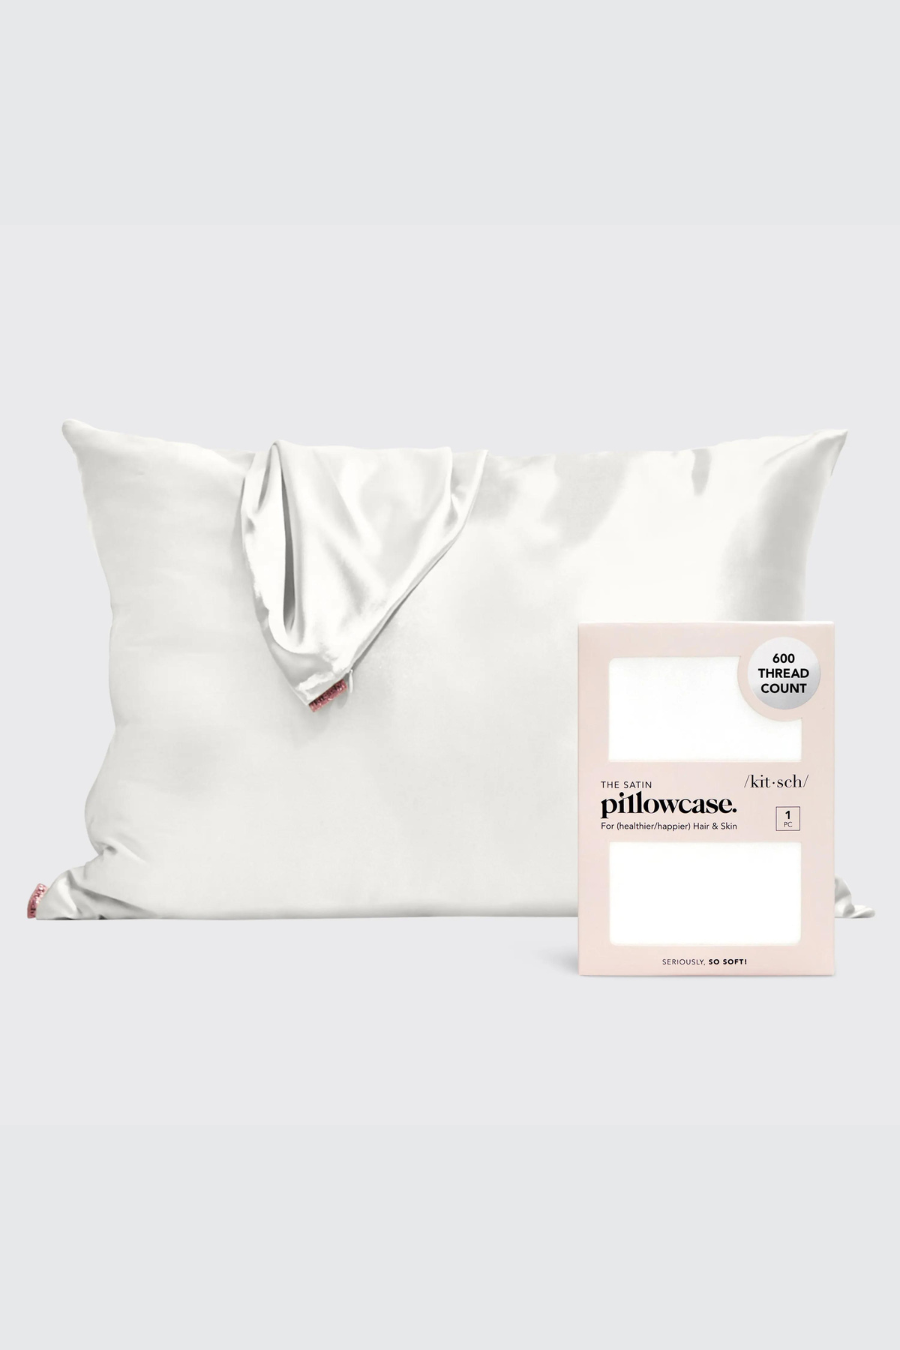 pillow sitting upright with satin pillowcase drapped over it and a satin pillowcase in its packaging in front of it 